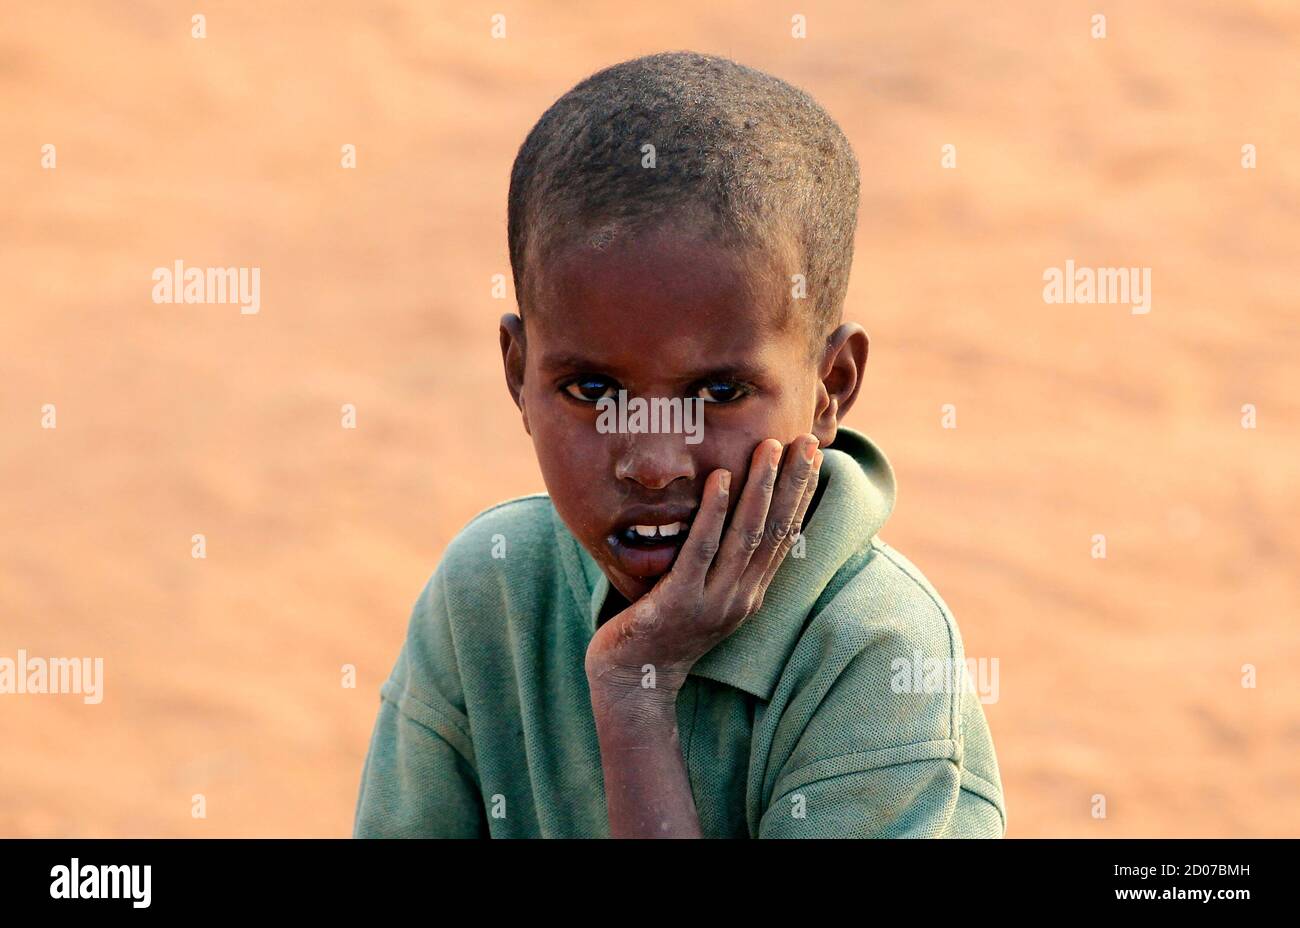 A Somali refugee boy sits at the Ifo extension refugee camp in Dadaab, near the Kenya-Somalia border, July 31, 2011. The whole of drought- and conflict-wracked southern Somalia is heading into famine as the Horn of Africa food crisis deepens, the United Nations said. REUTERS/Thomas Mukoya (KENYA - Tags: SOCIETY CIVIL UNREST DISASTER ENVIRONMENT) Stock Photo